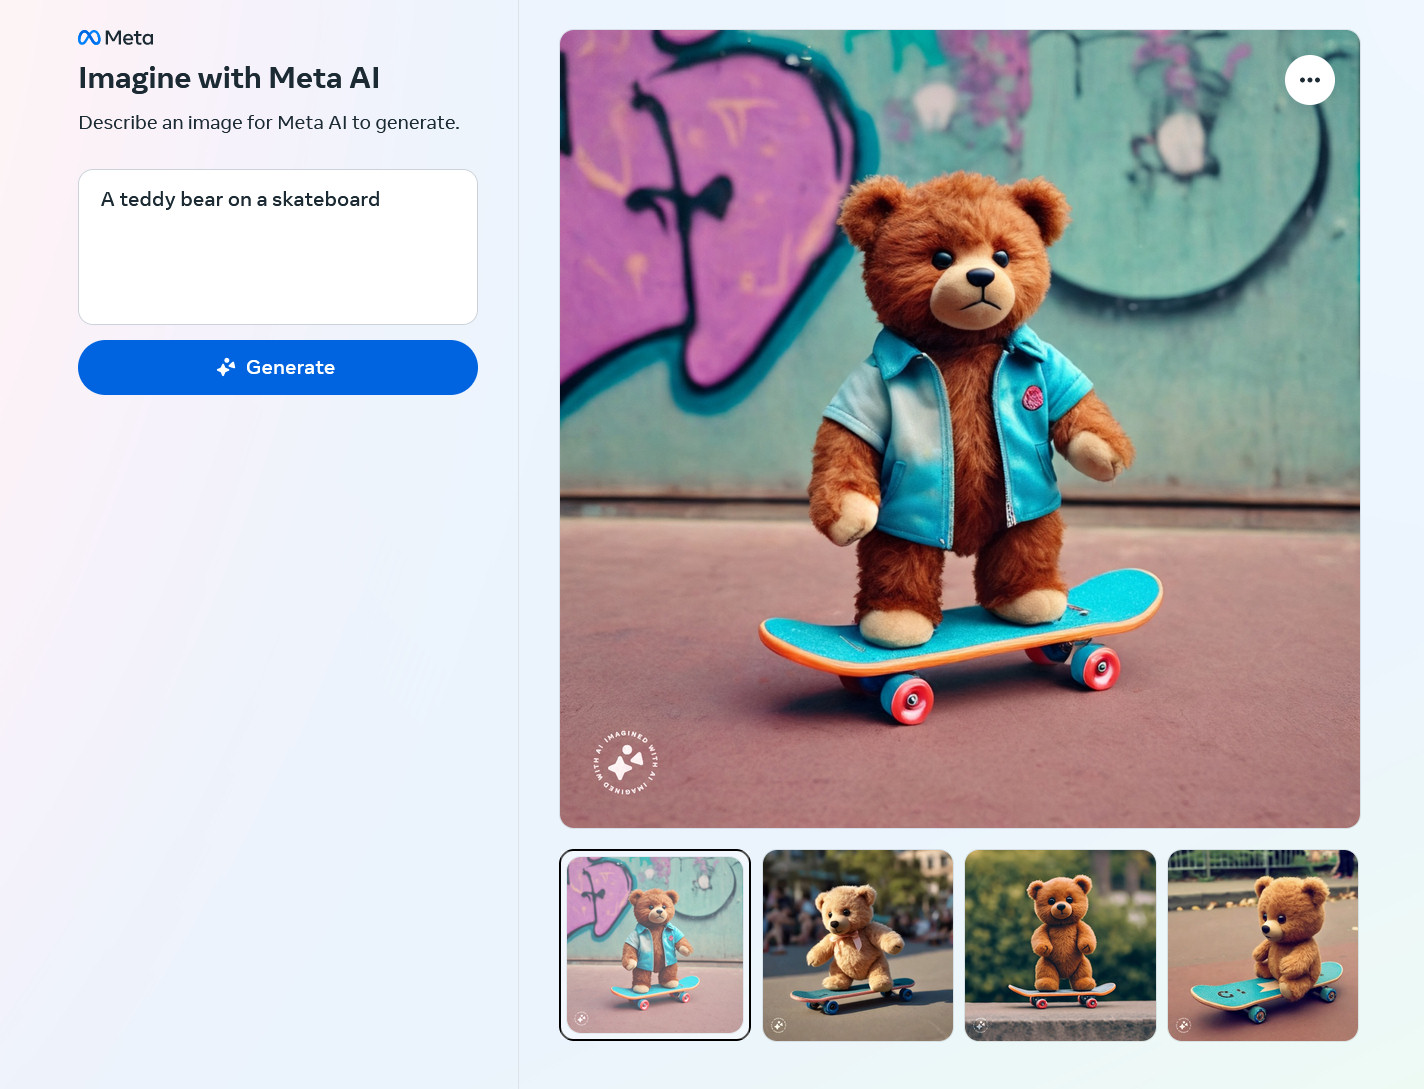 AI-generated images of A teddy bear on a skateboard created by Meta Emu on the Imagine with Meta AI website.